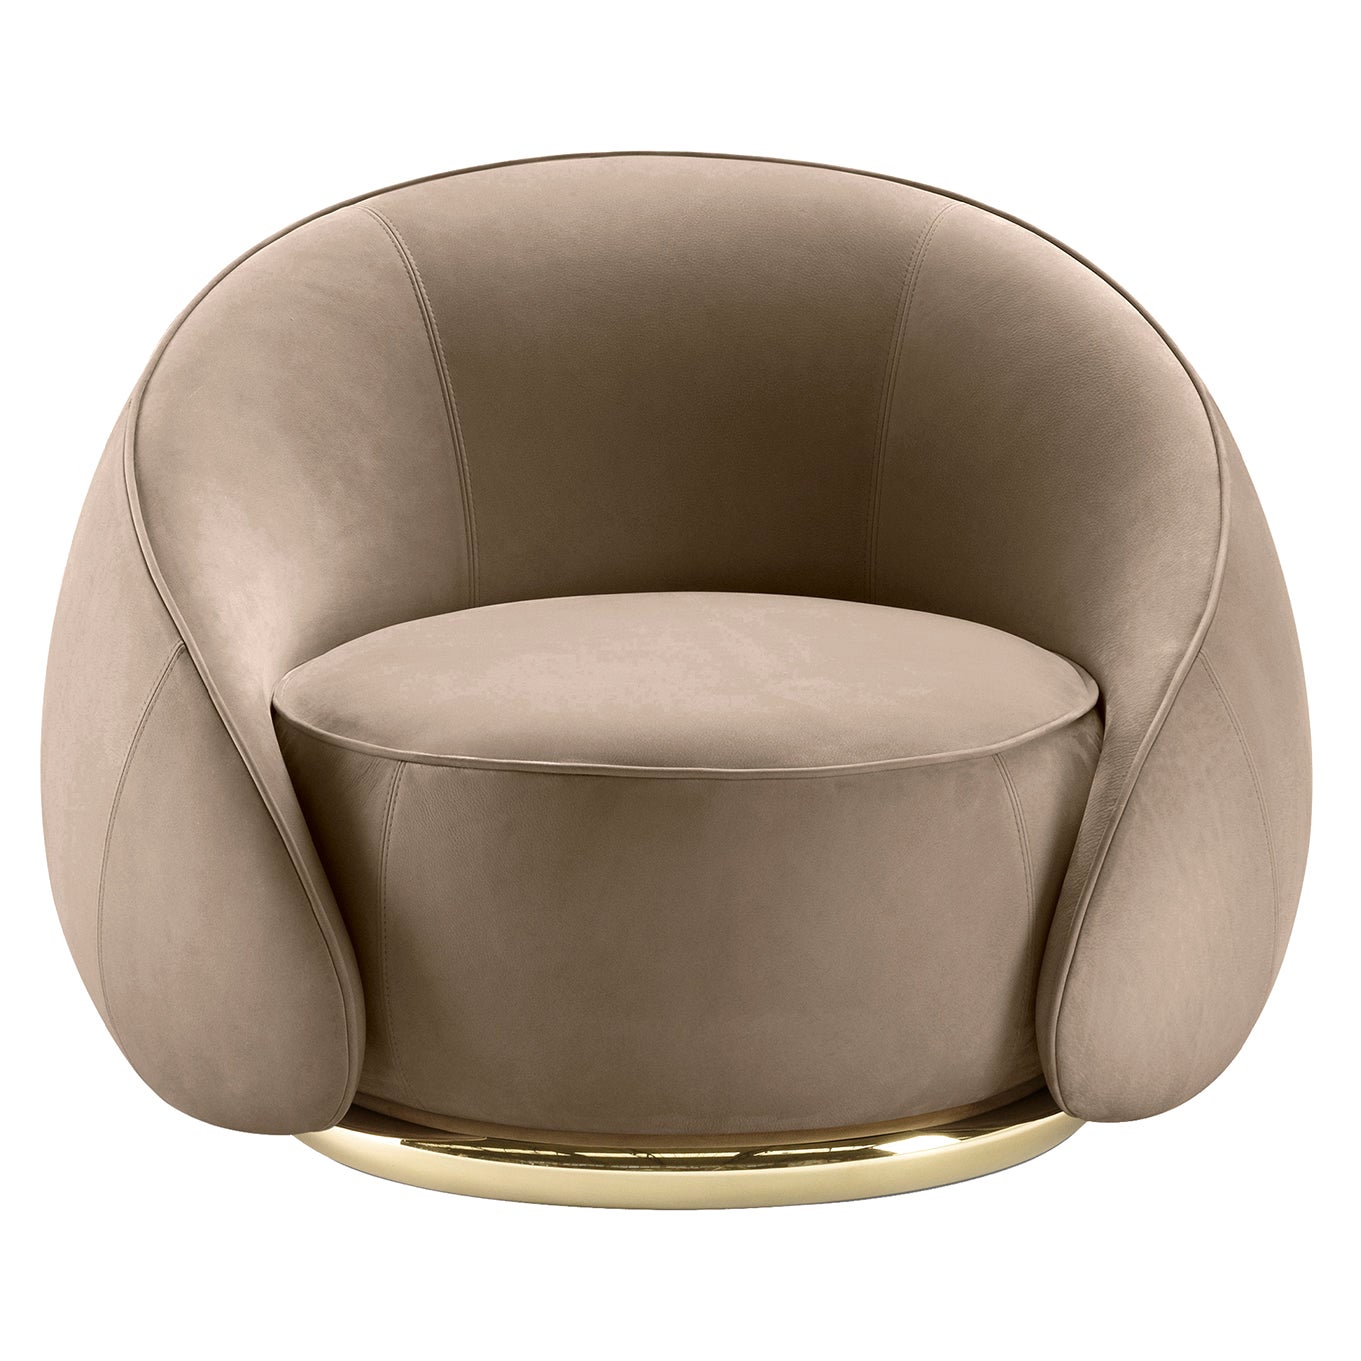 Abbracci Taupe Armchair by Lorenza Bozzoli For Sale